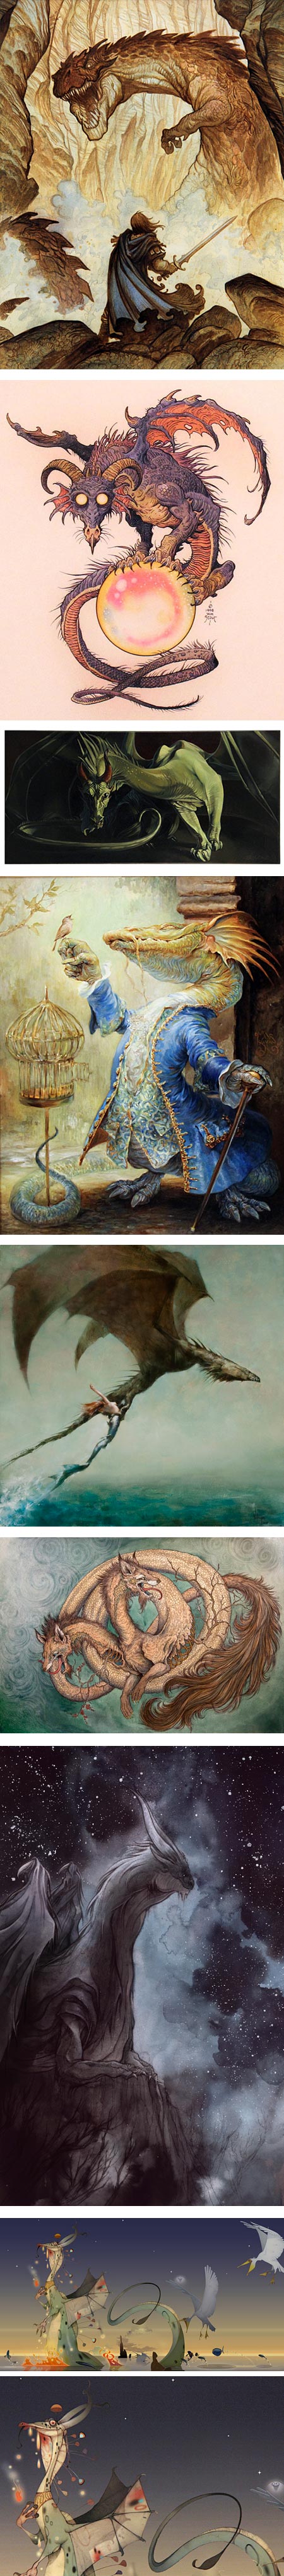 Breath of Embers: Art of Dragons at Gallery Nucleus - Justin Gerard, William Stout, Heather Theurer, Omar Rayyan, Eric Velhagen, Caitlin Hackett, Cory Godbey, Olivier Tossan